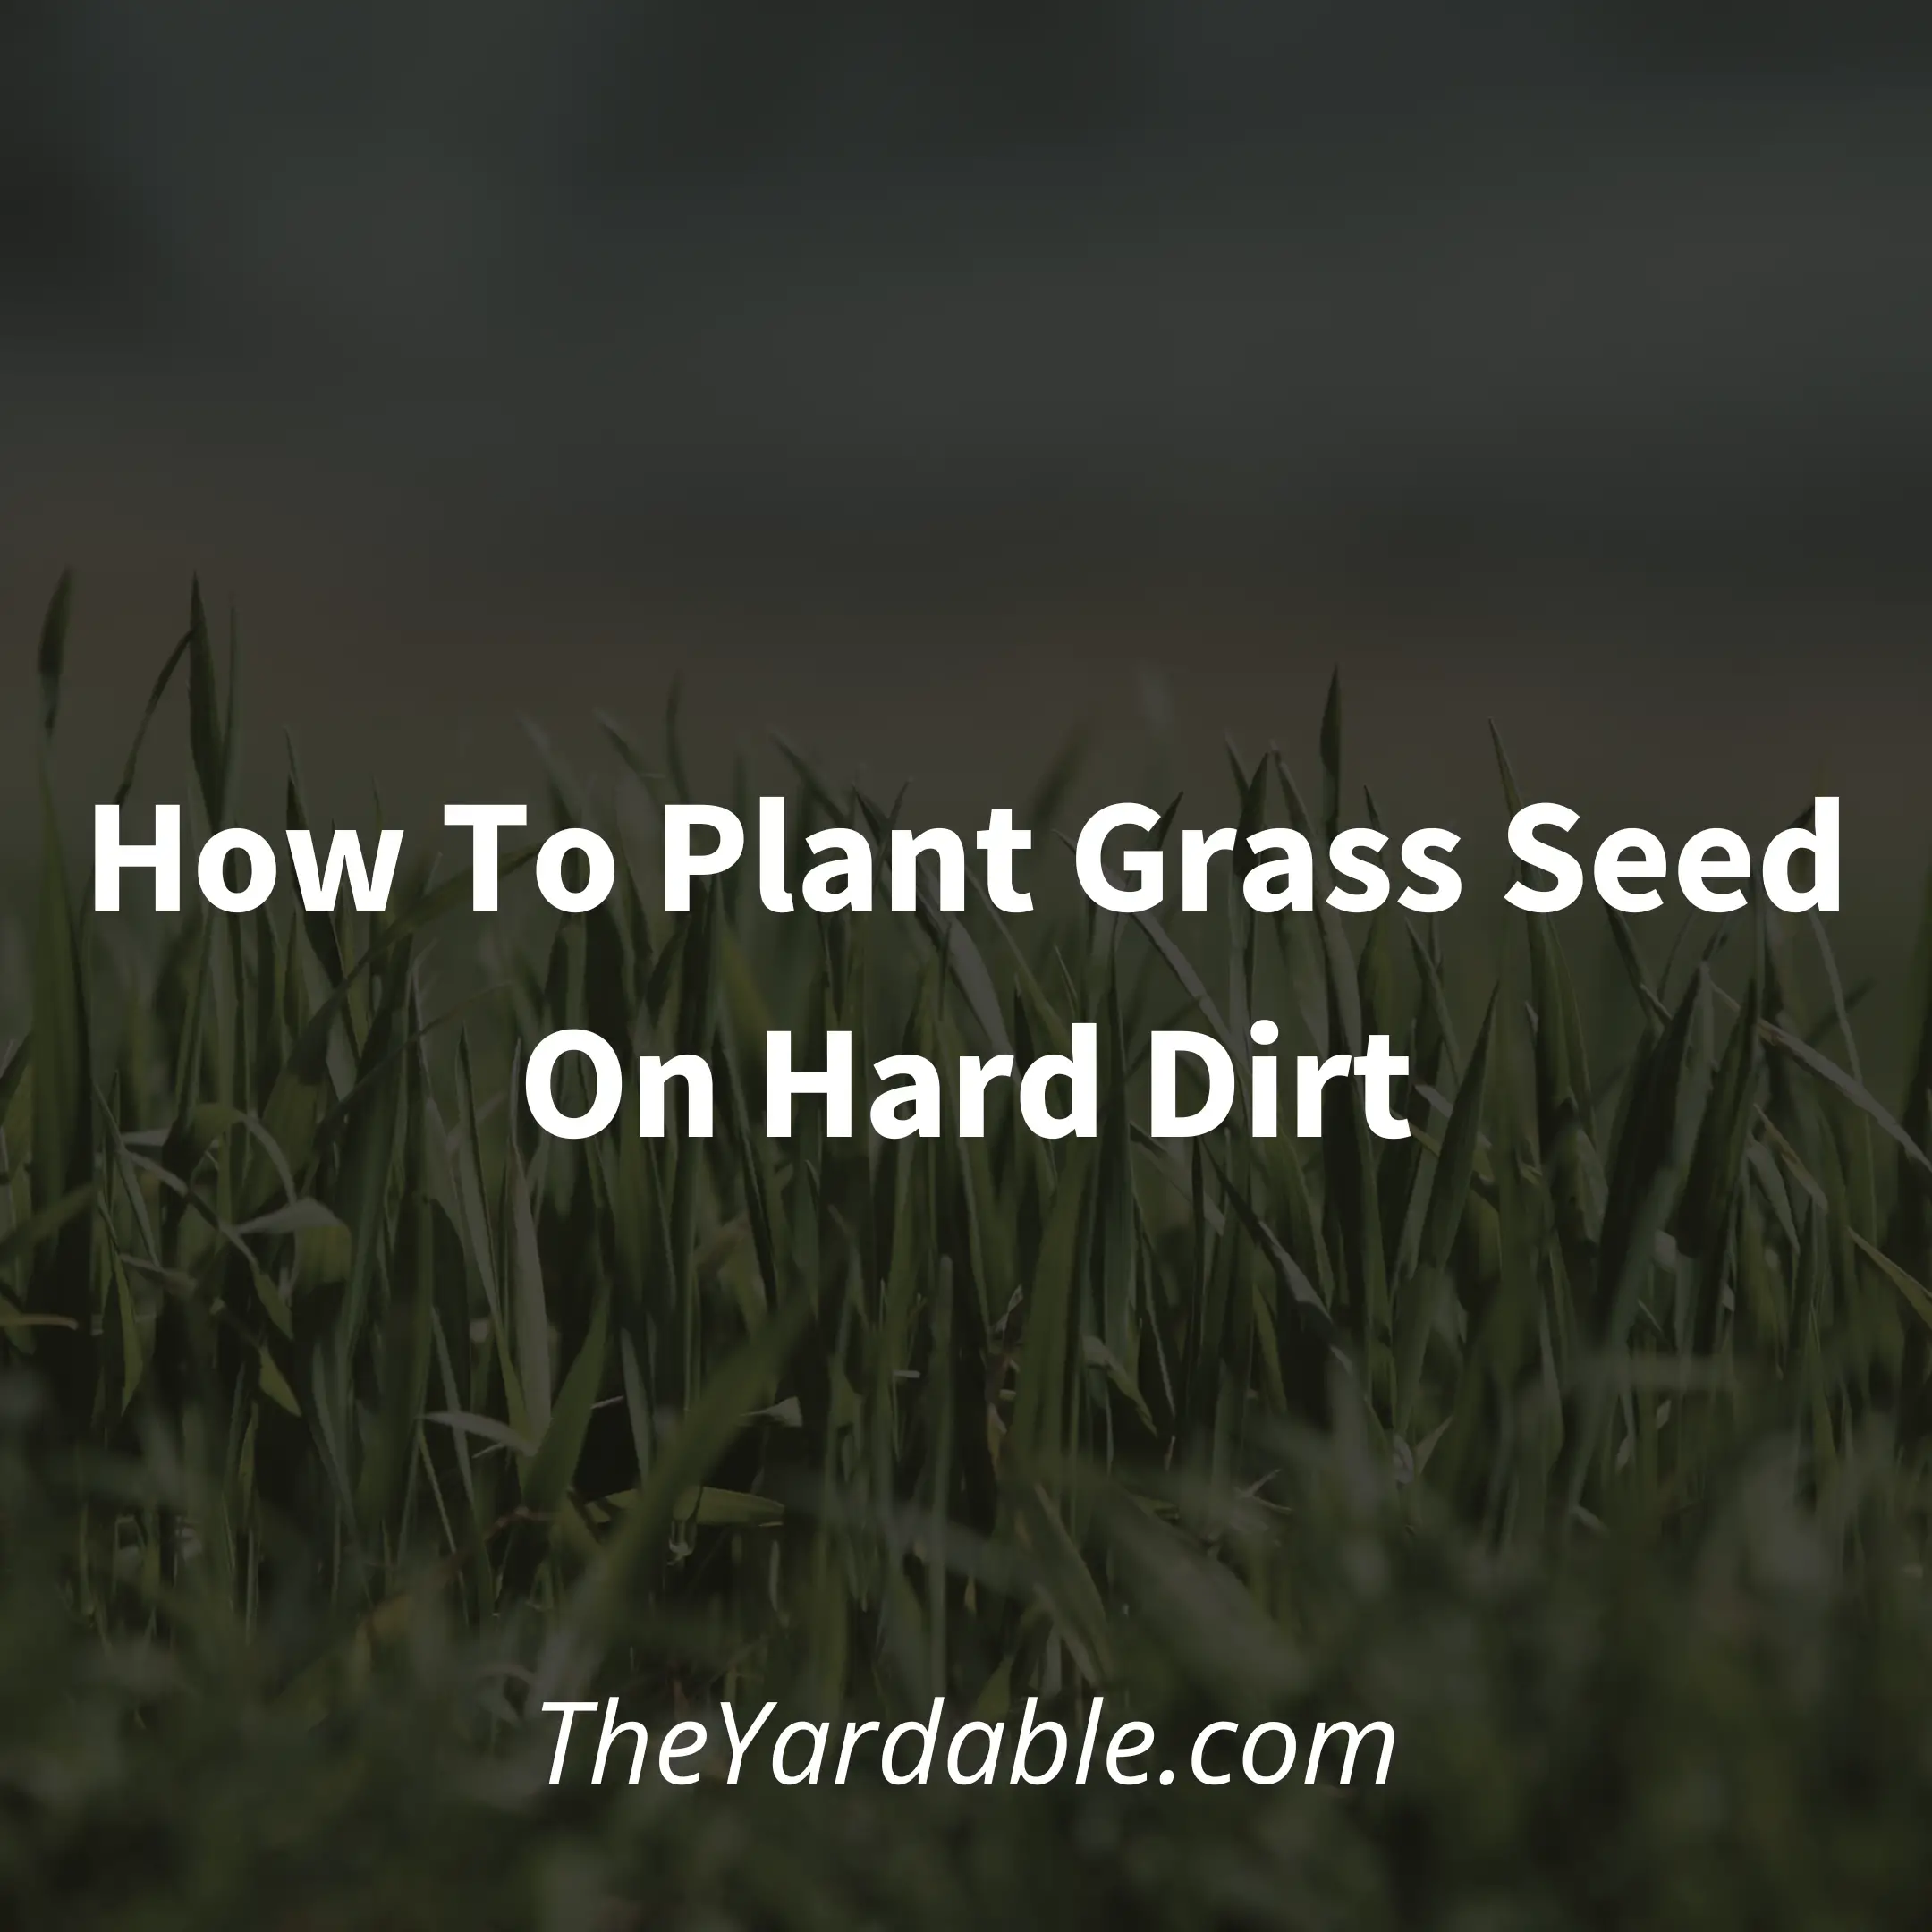 How to Plant Grass Seed on Hard Dirt – Simple Guide